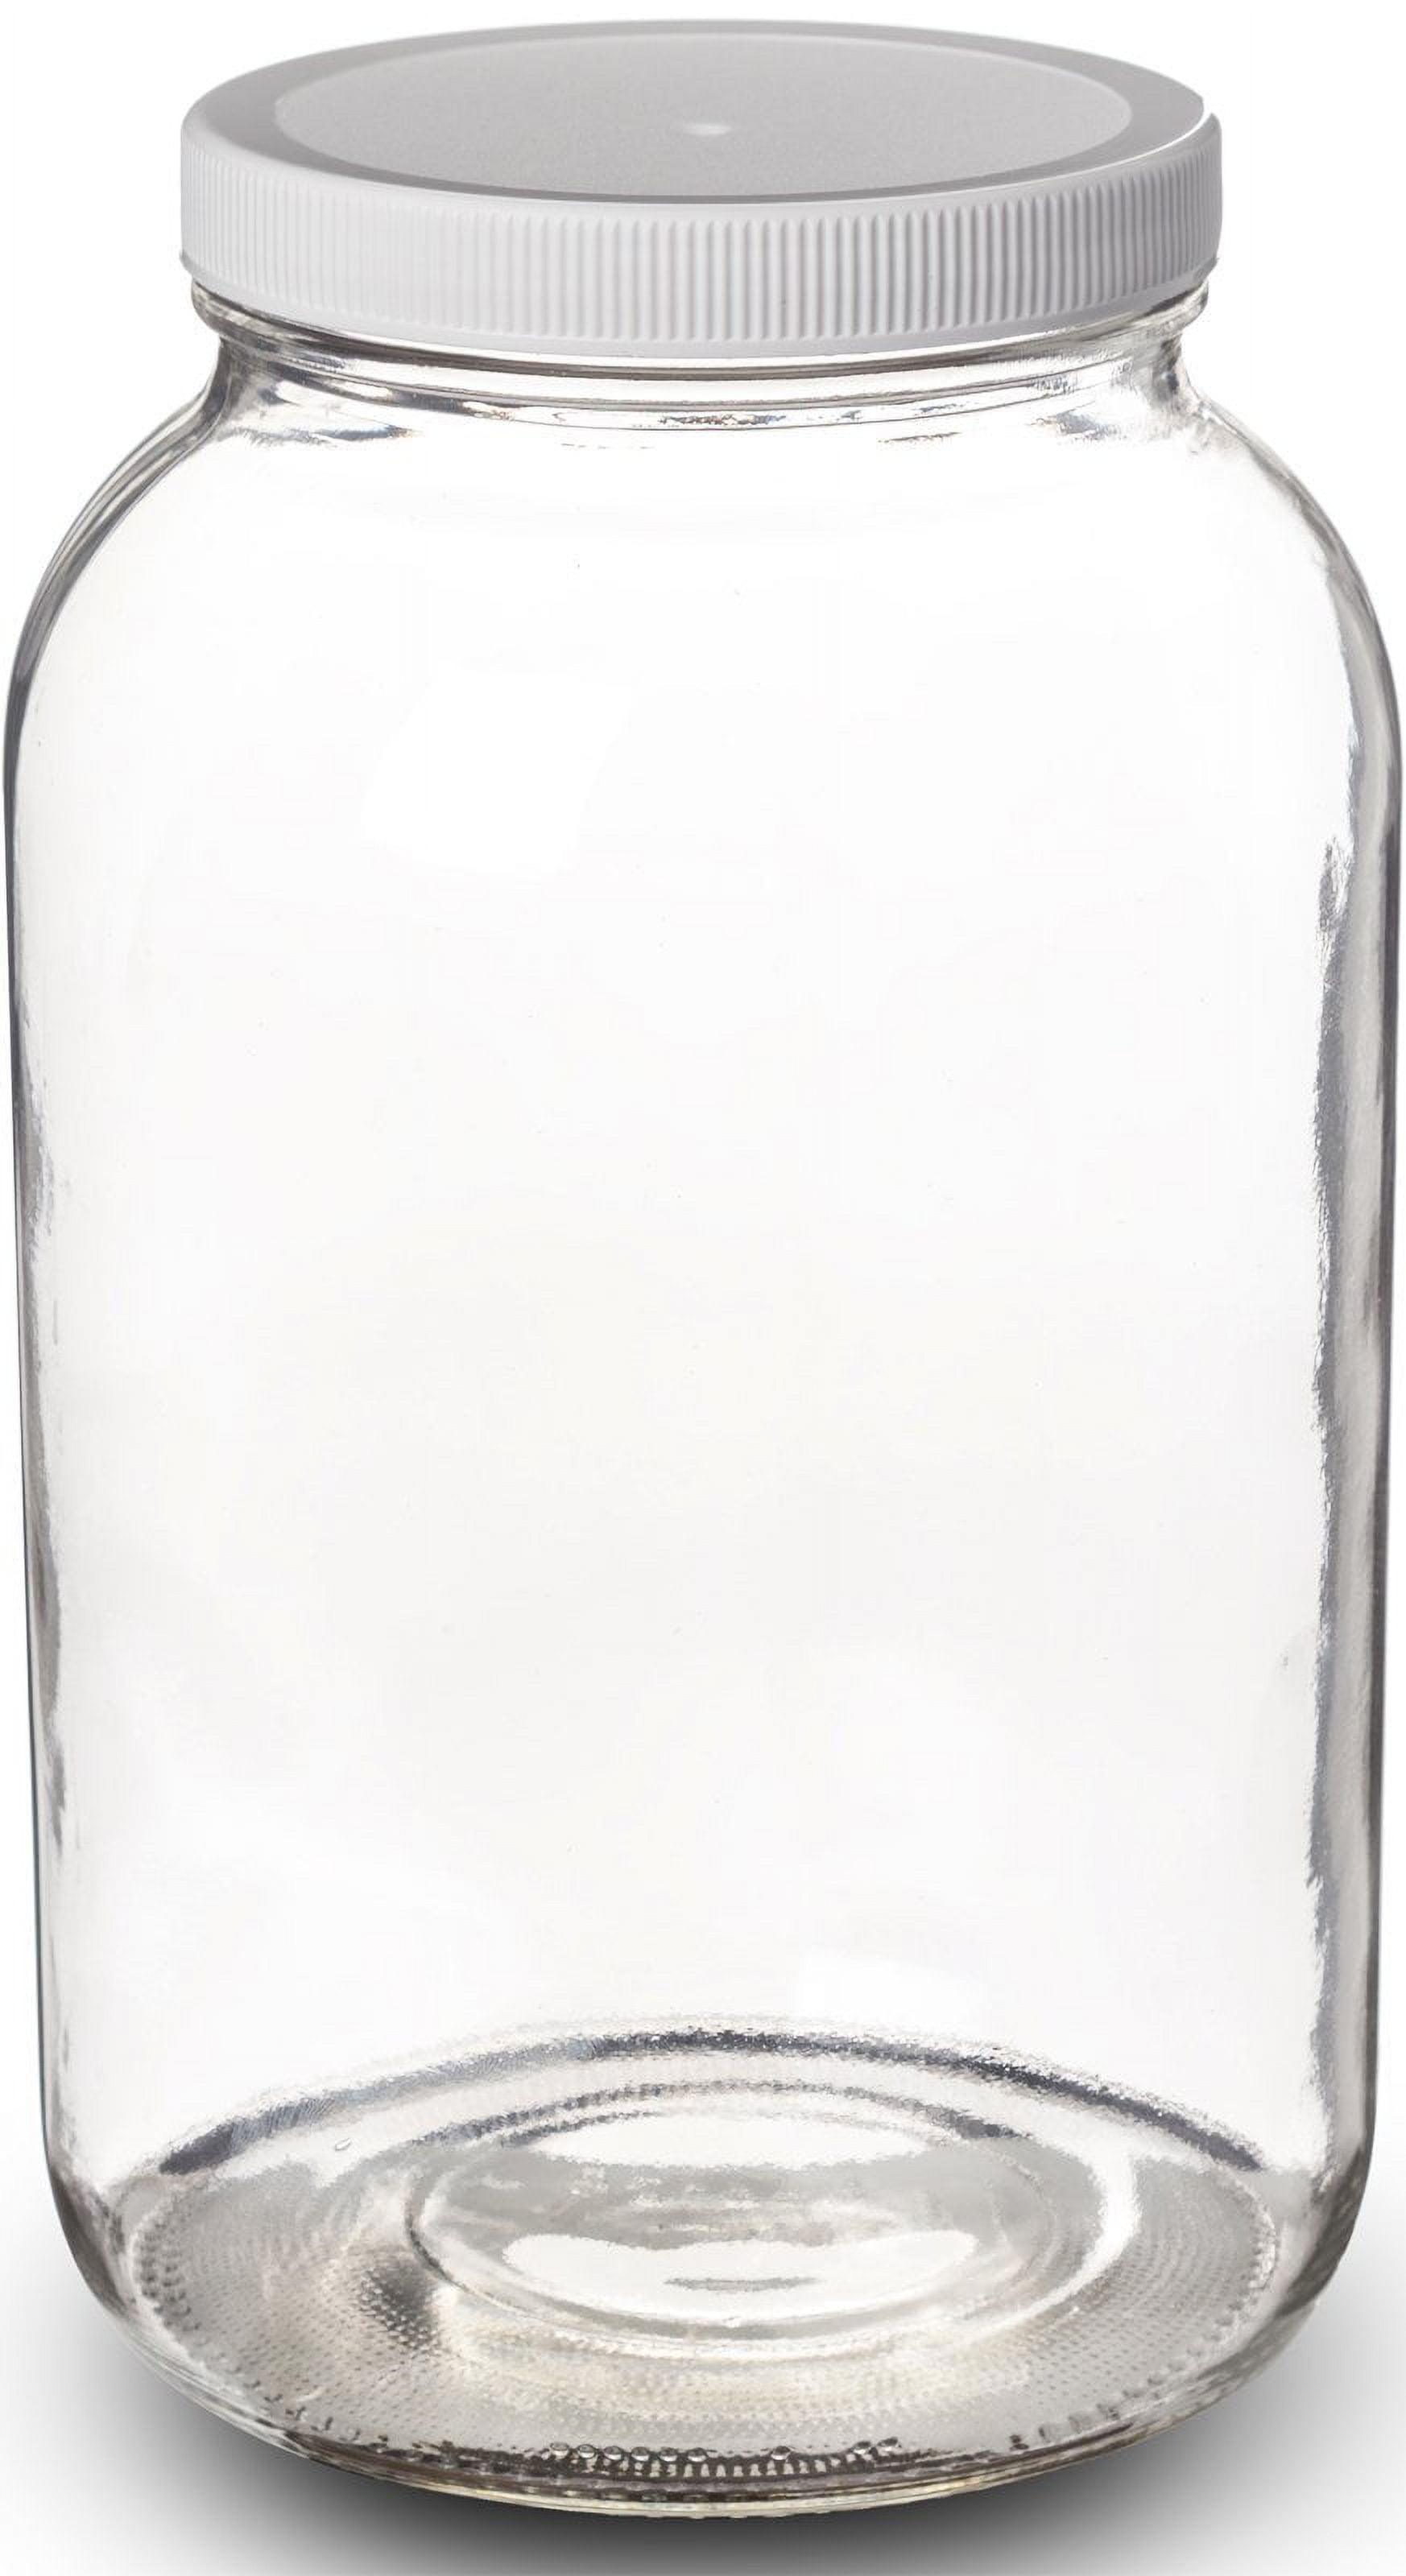 1 Gallon Glass Cookie Jar with Airtight Lid and Scooper - BPA-Free, Large Capacity, Dishwasher Safe, Clear Cookie Jar - Glass Laundry Storage